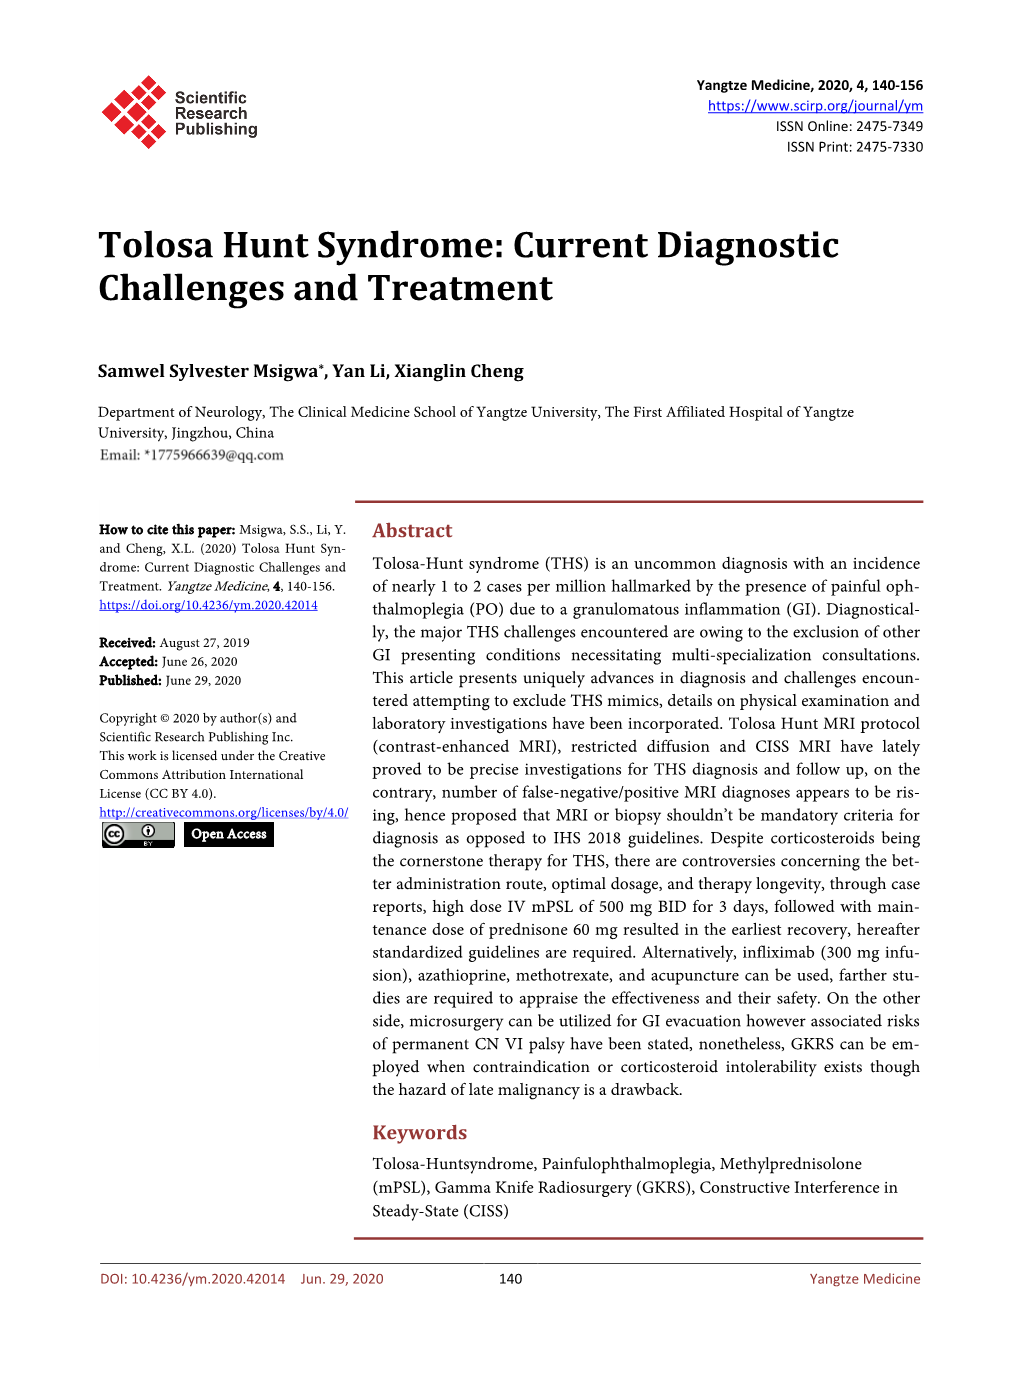 Tolosa Hunt Syndrome: Current Diagnostic Challenges and Treatment